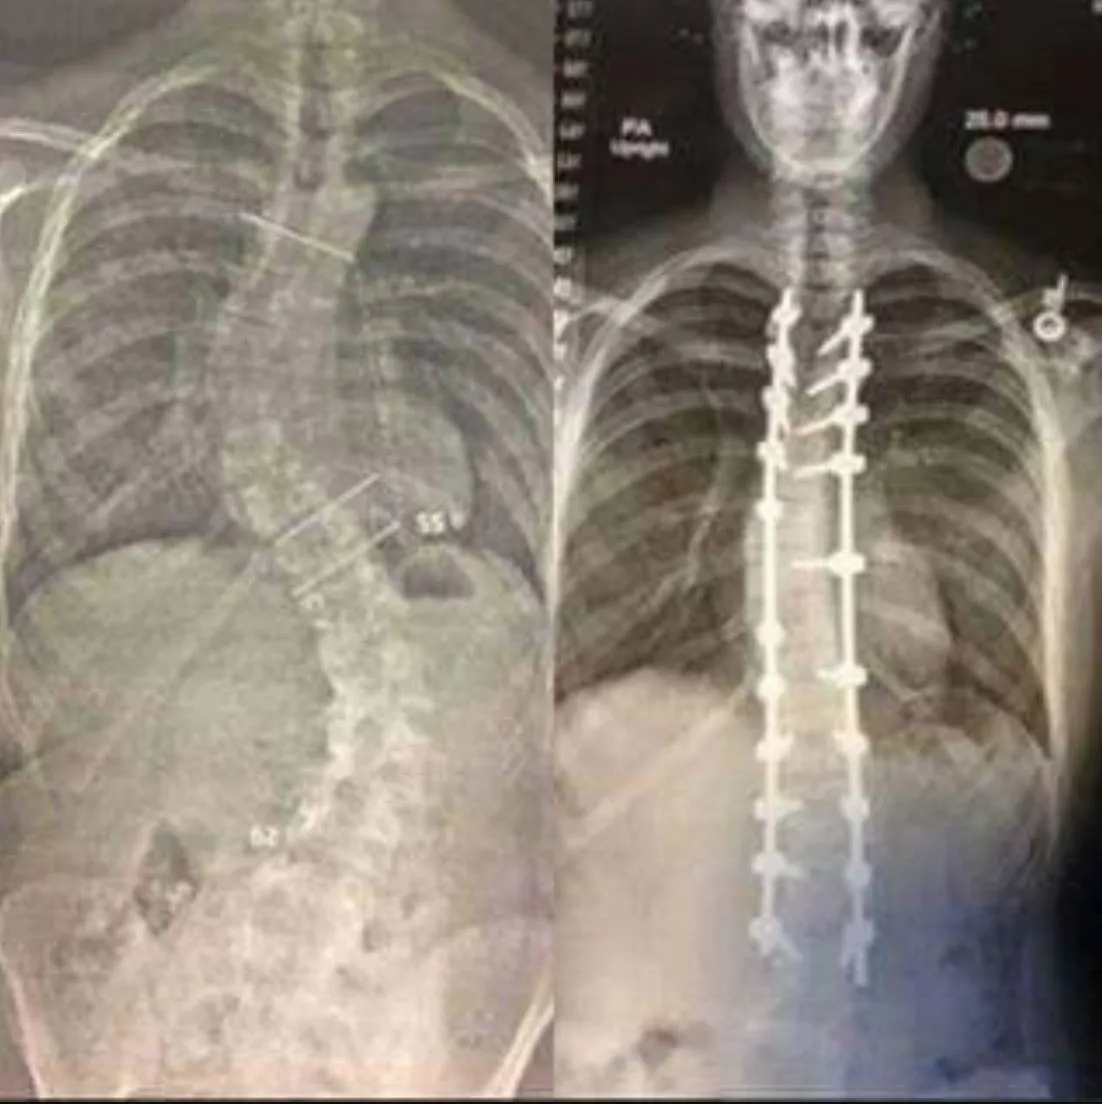 x-rays show before (crooked spine) and after (spine straighter with rods) 